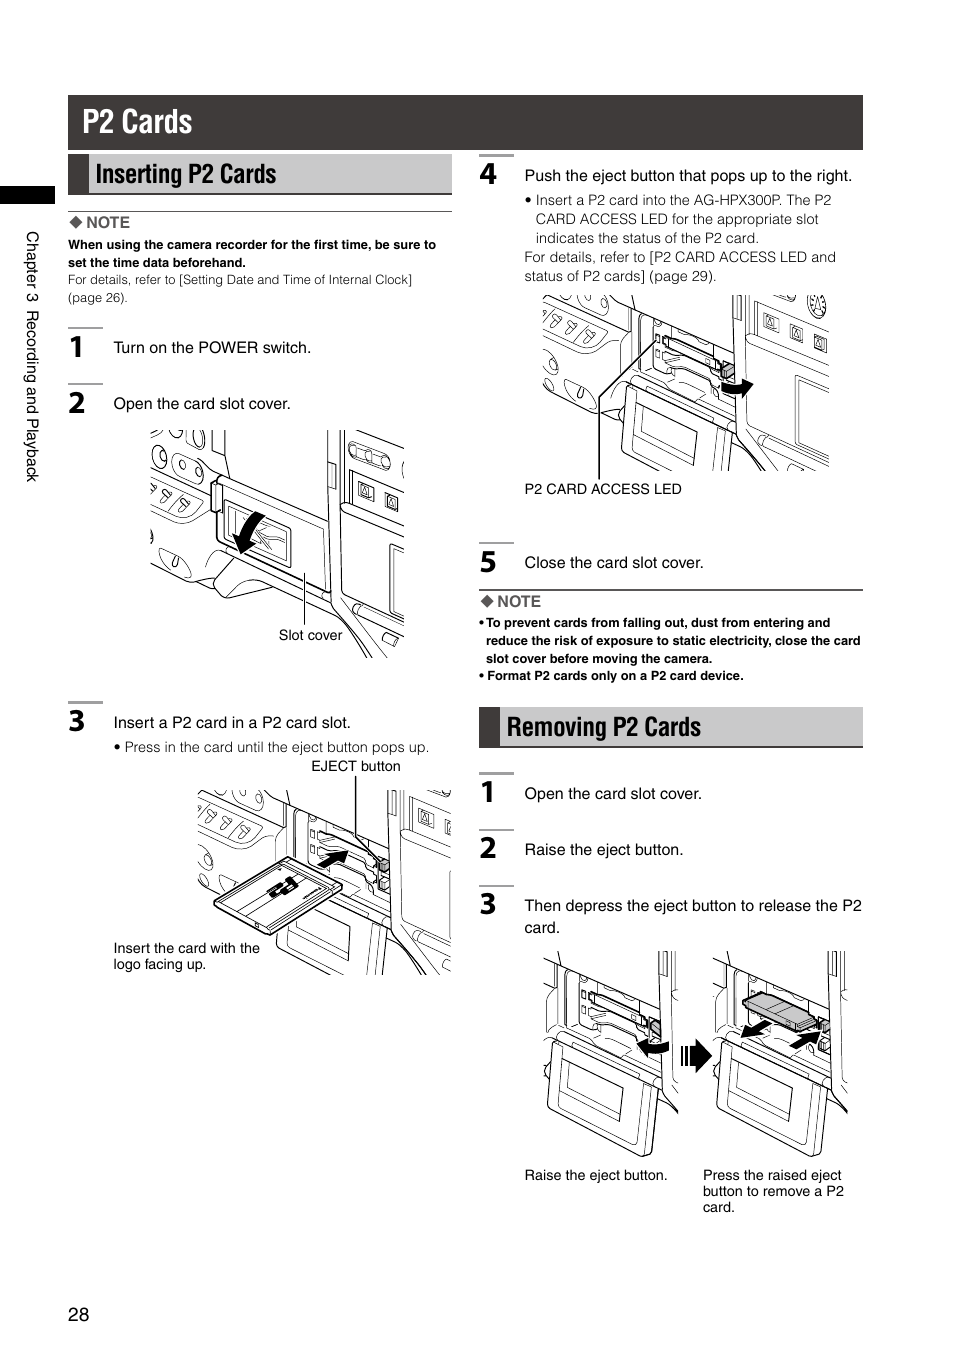 P2 cards, Inserting p2 cards, Removing p2 cards | Inserting p2 cards removing p2 cards | Panasonic AG-HPX300P User Manual | Page 28 / 166